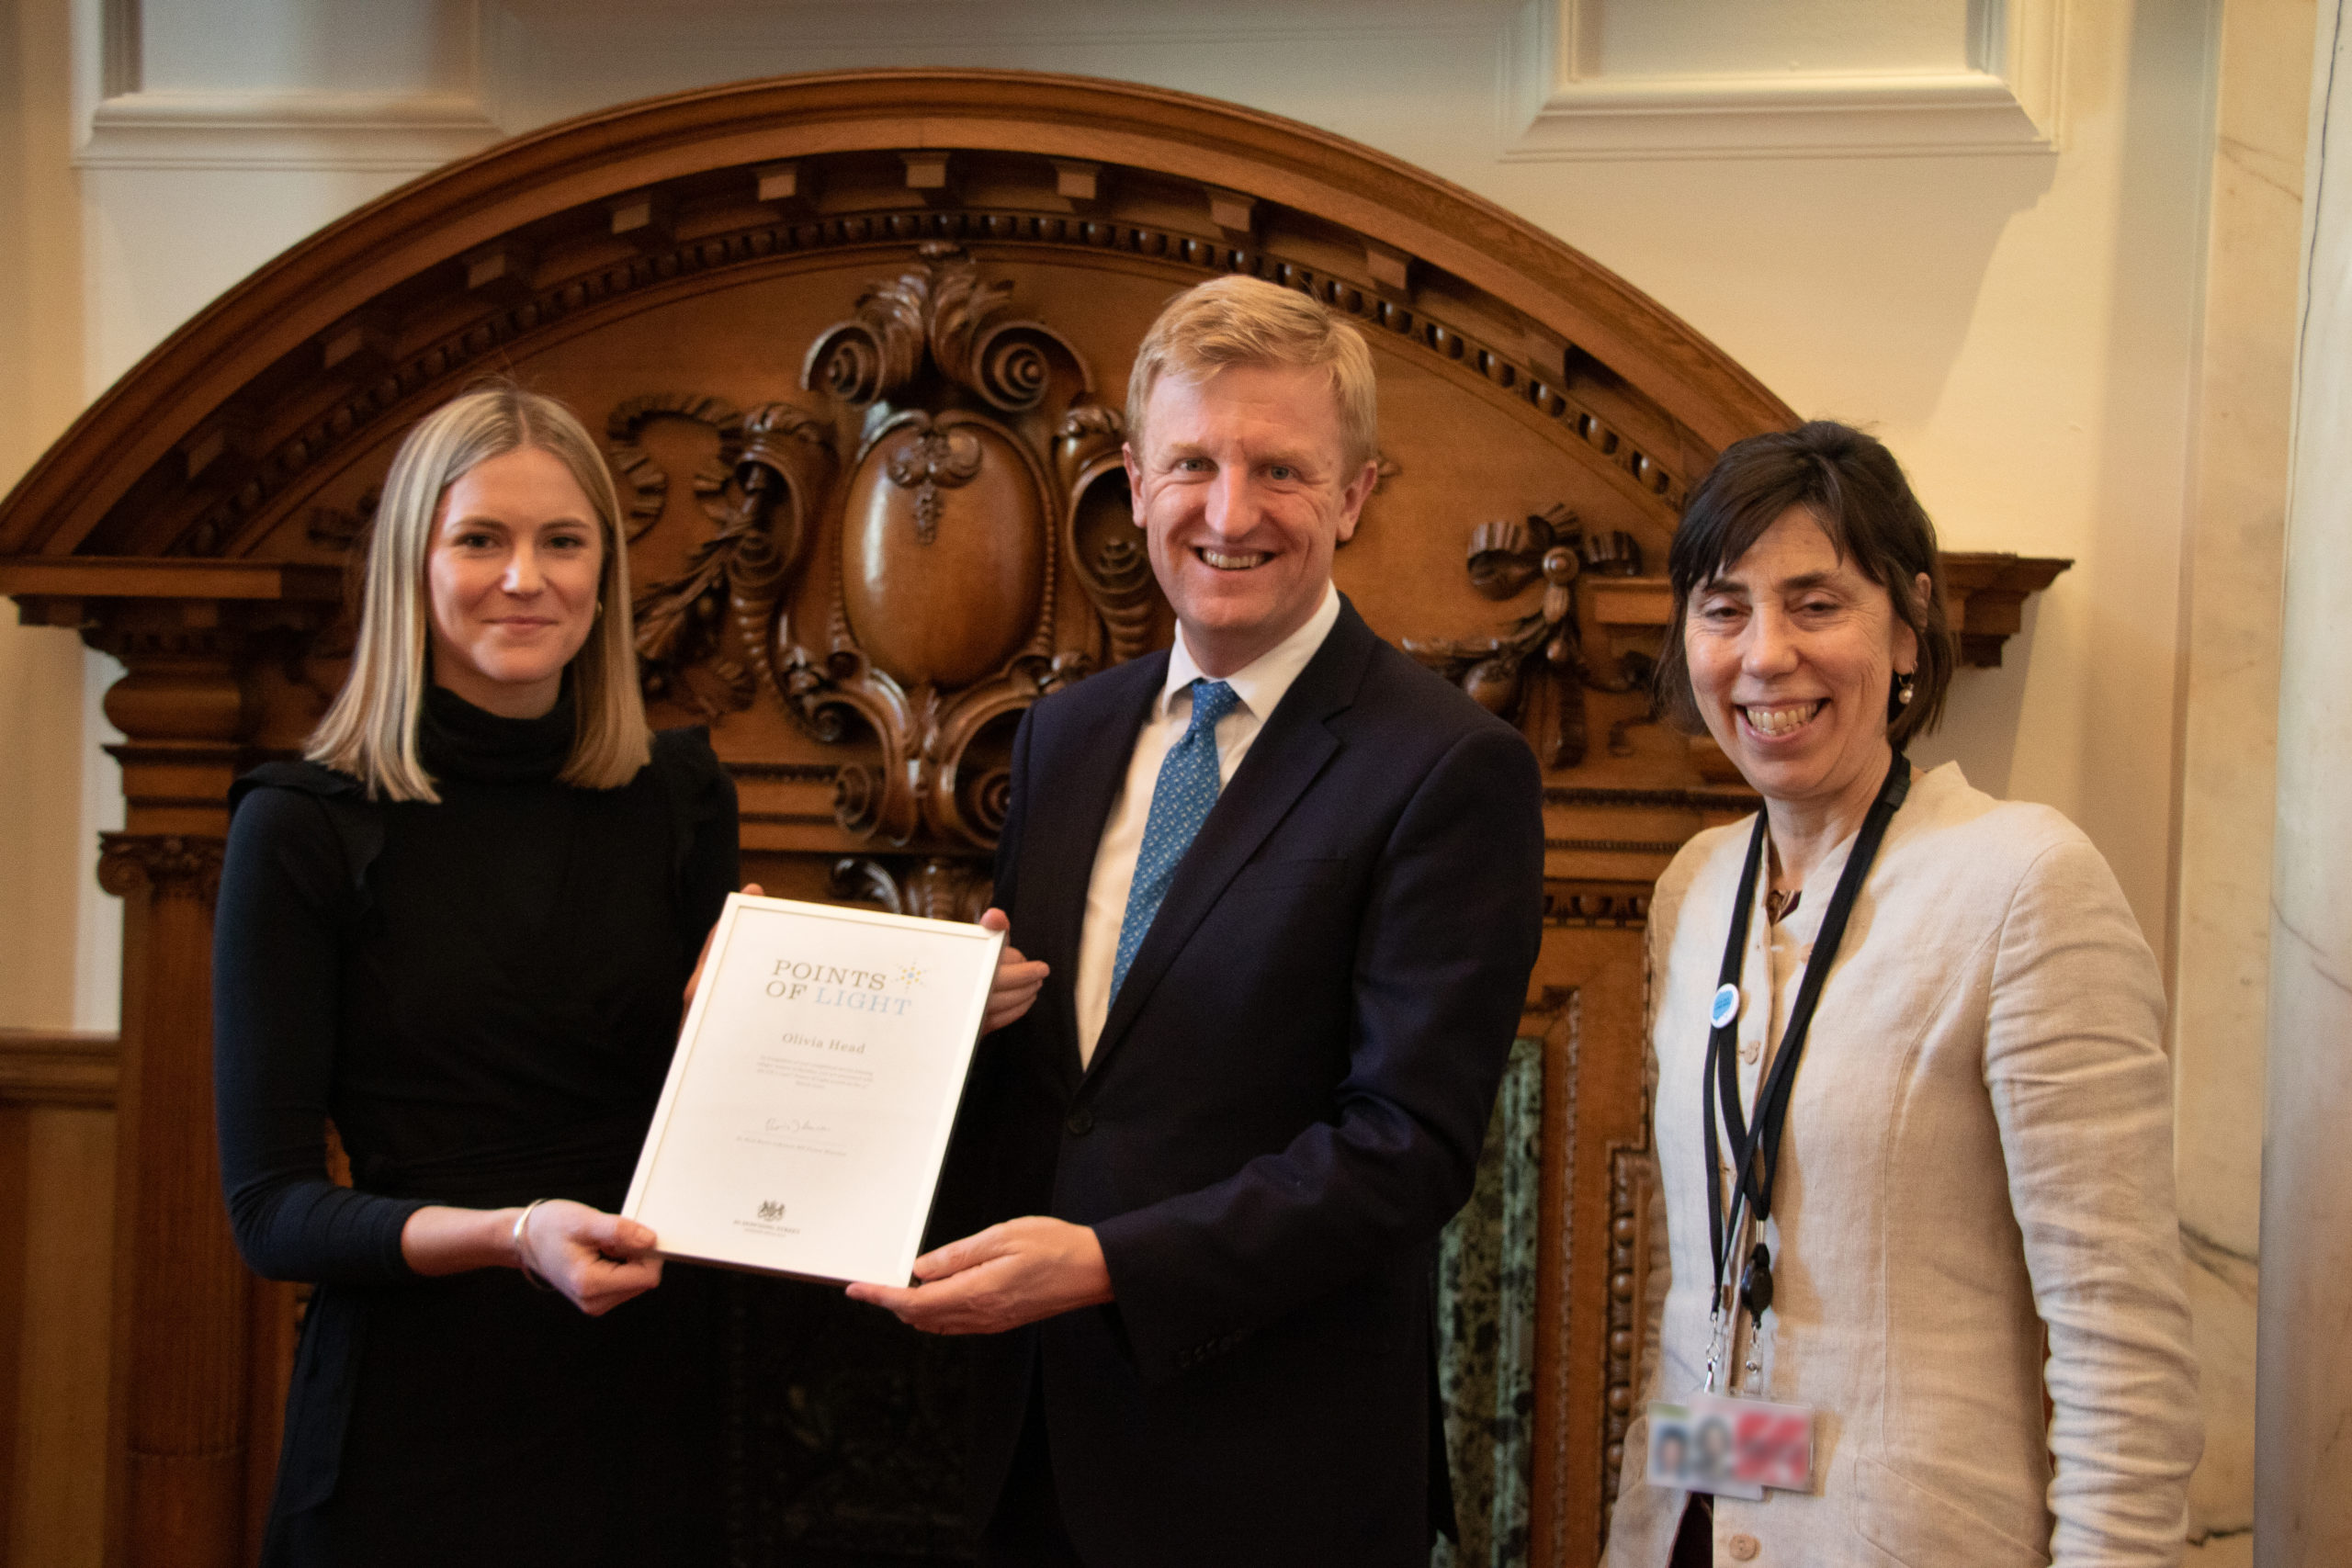 Olivia Head with Oliver Dowden MP and Baroness Barran